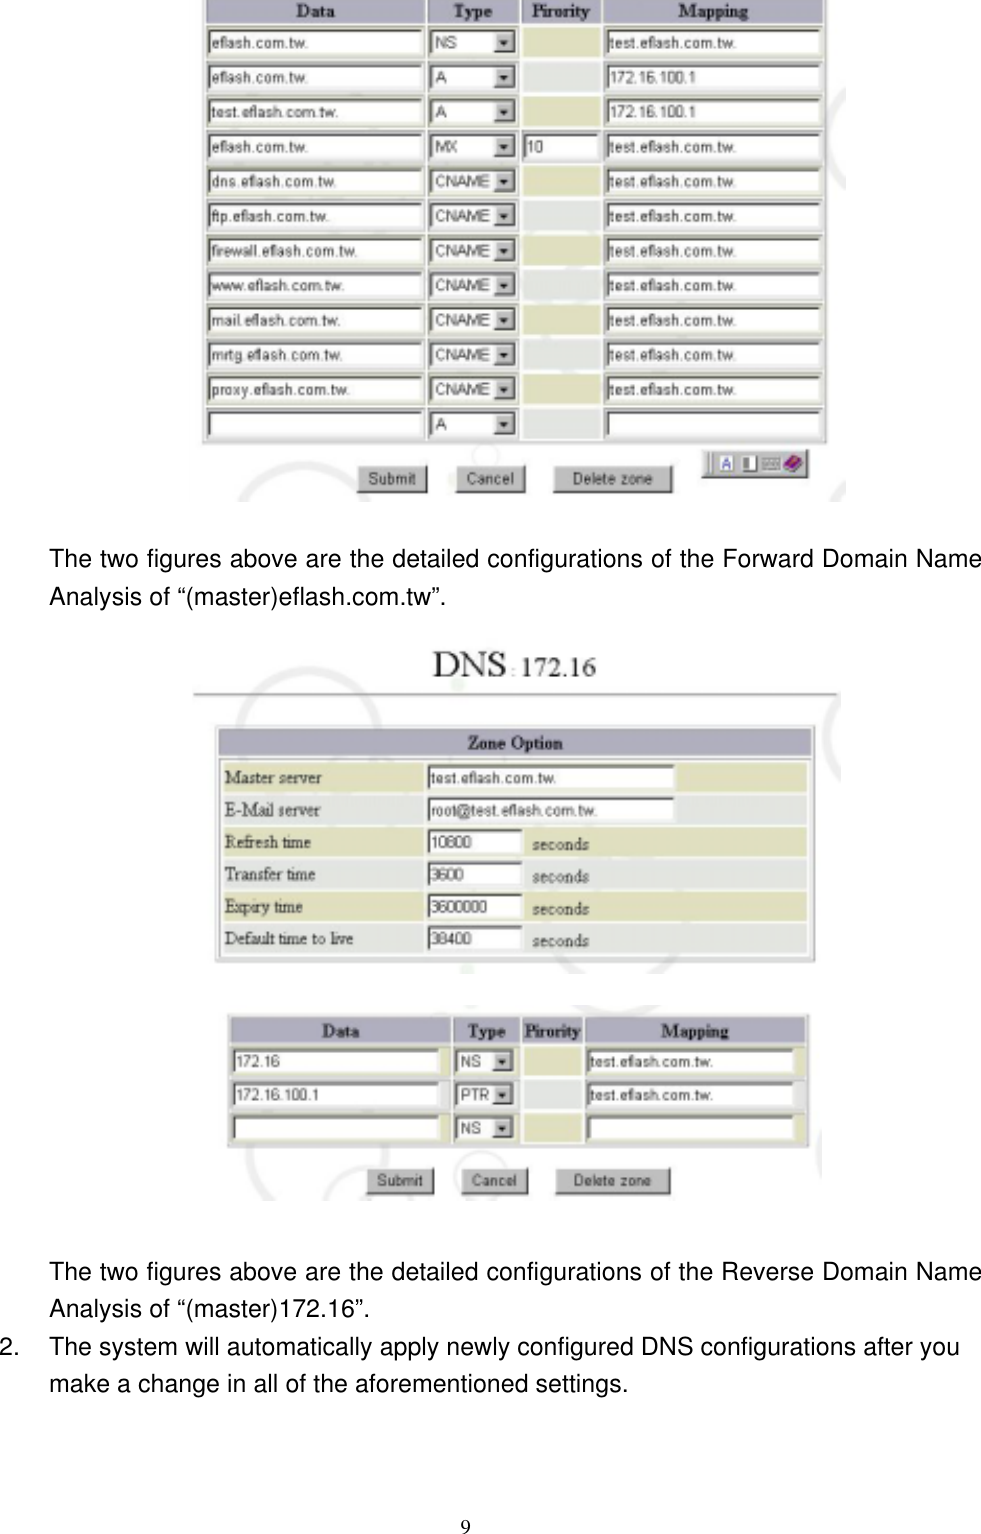  9  The two figures above are the detailed configurations of the Forward Domain Name Analysis of “(master)eflash.com.tw”.   The two figures above are the detailed configurations of the Reverse Domain Name Analysis of “(master)172.16”. 2.  The system will automatically apply newly configured DNS configurations after you make a change in all of the aforementioned settings.   